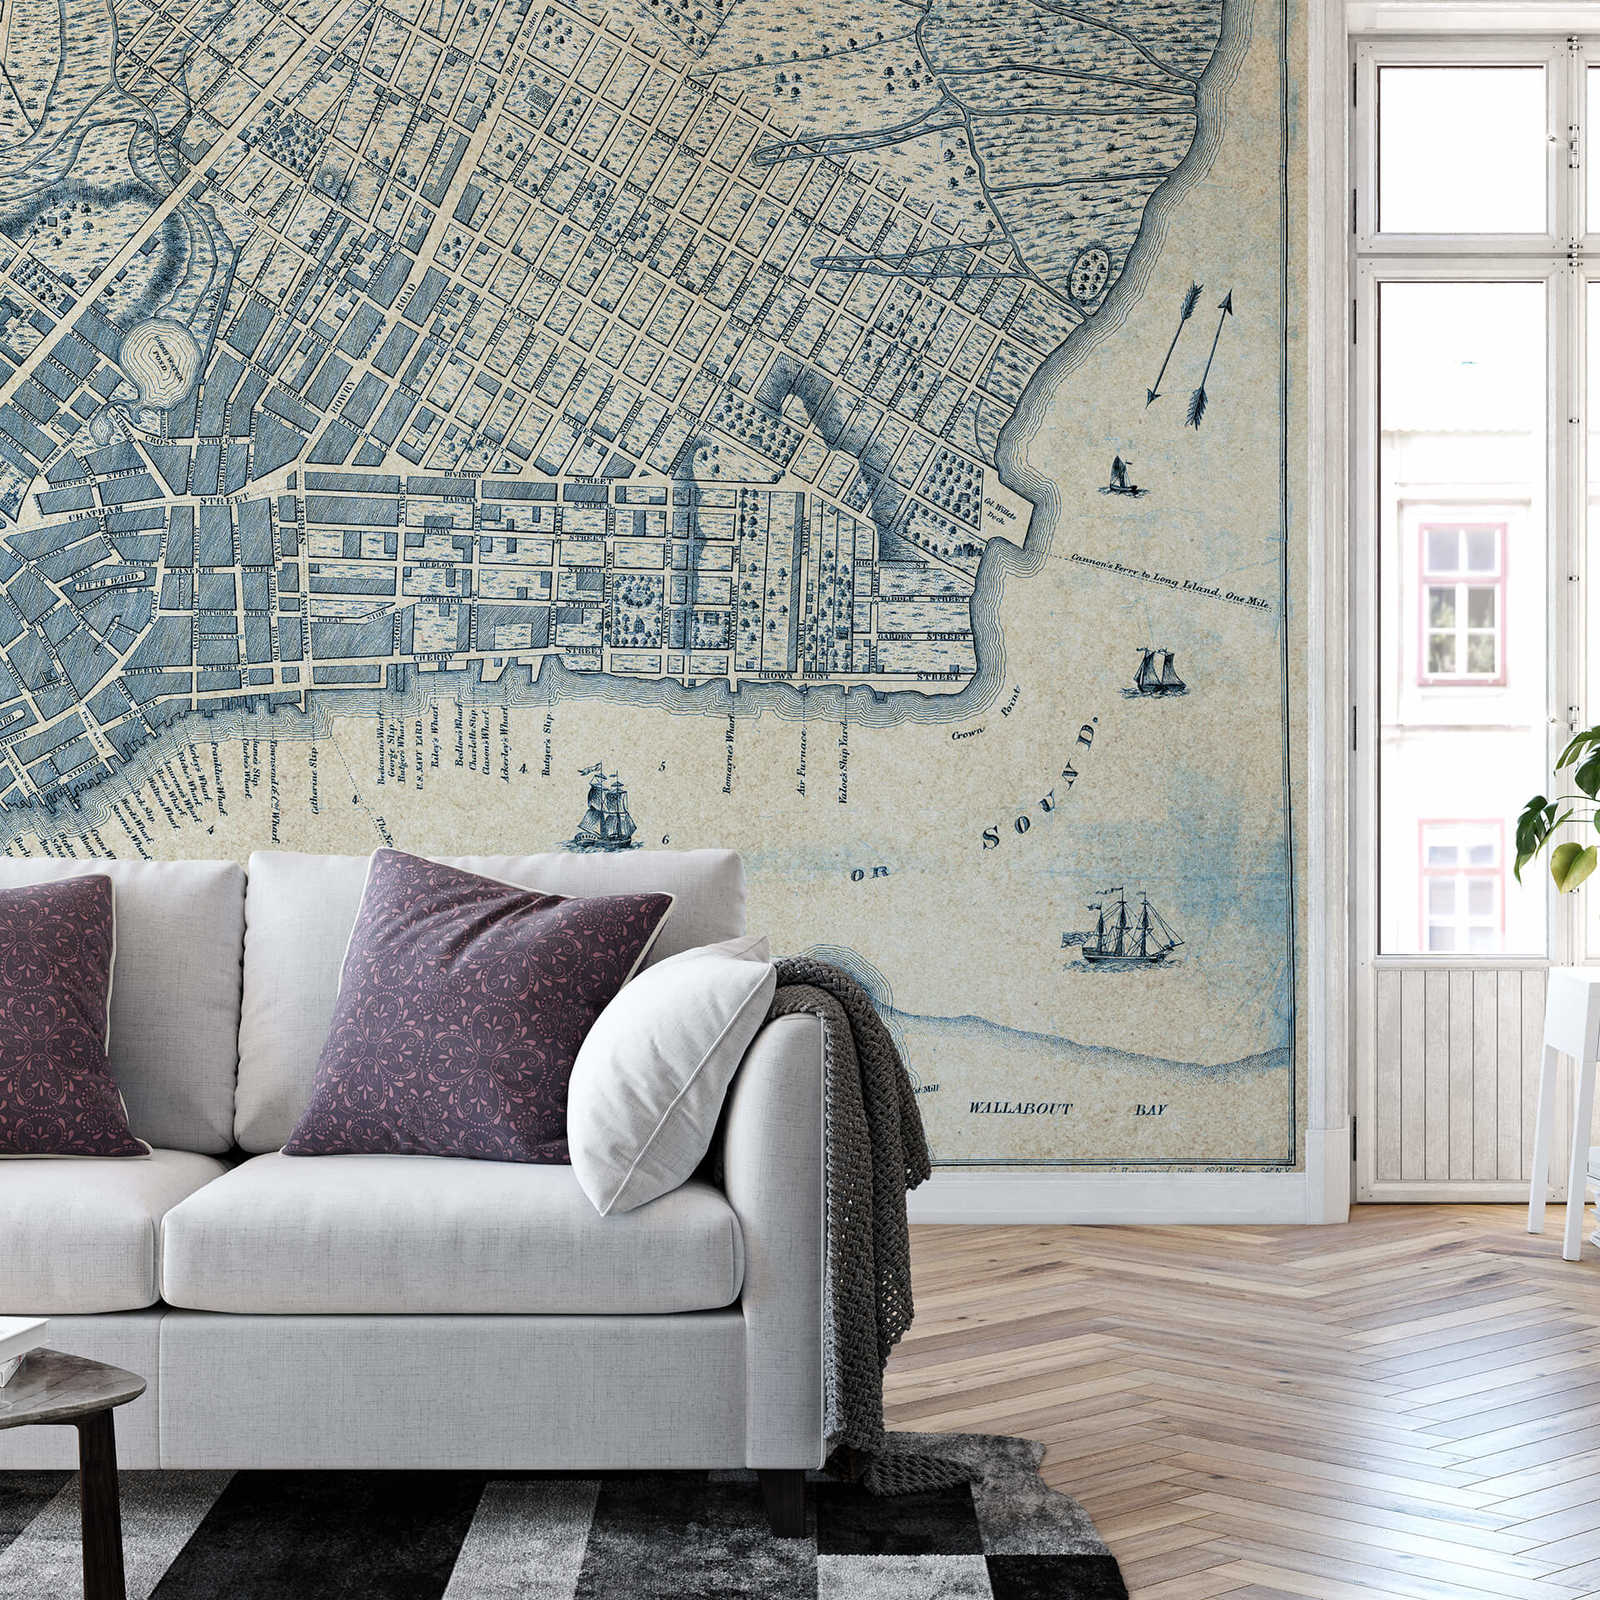             Vintage wall mural New York City Map - Blue, White
        